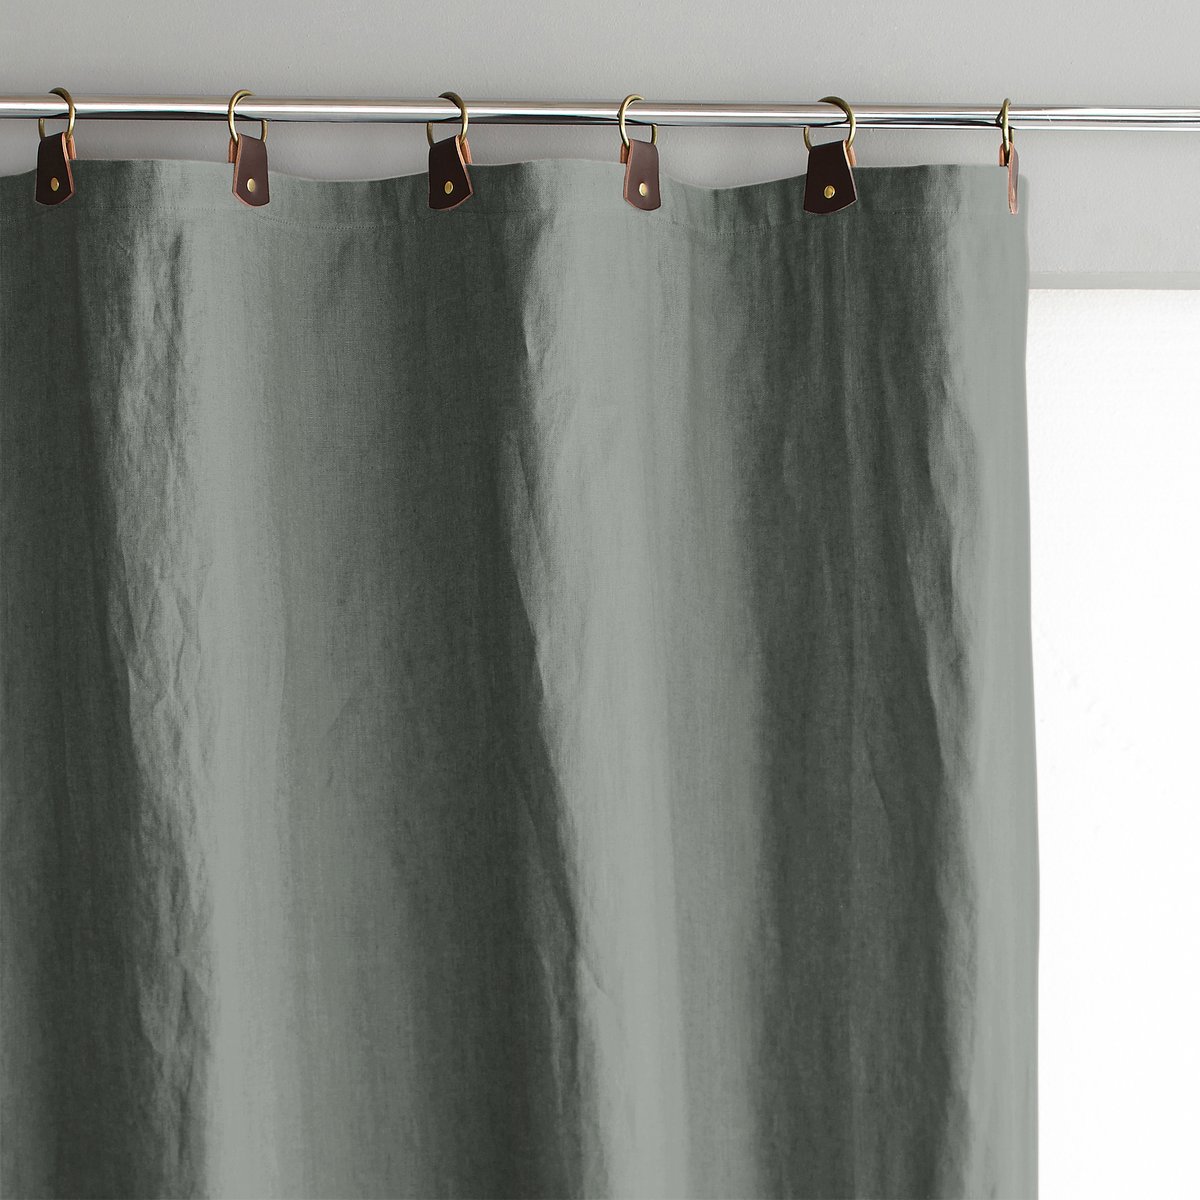 Image of Private Single Washed Linen Curtain with Leather Tabs